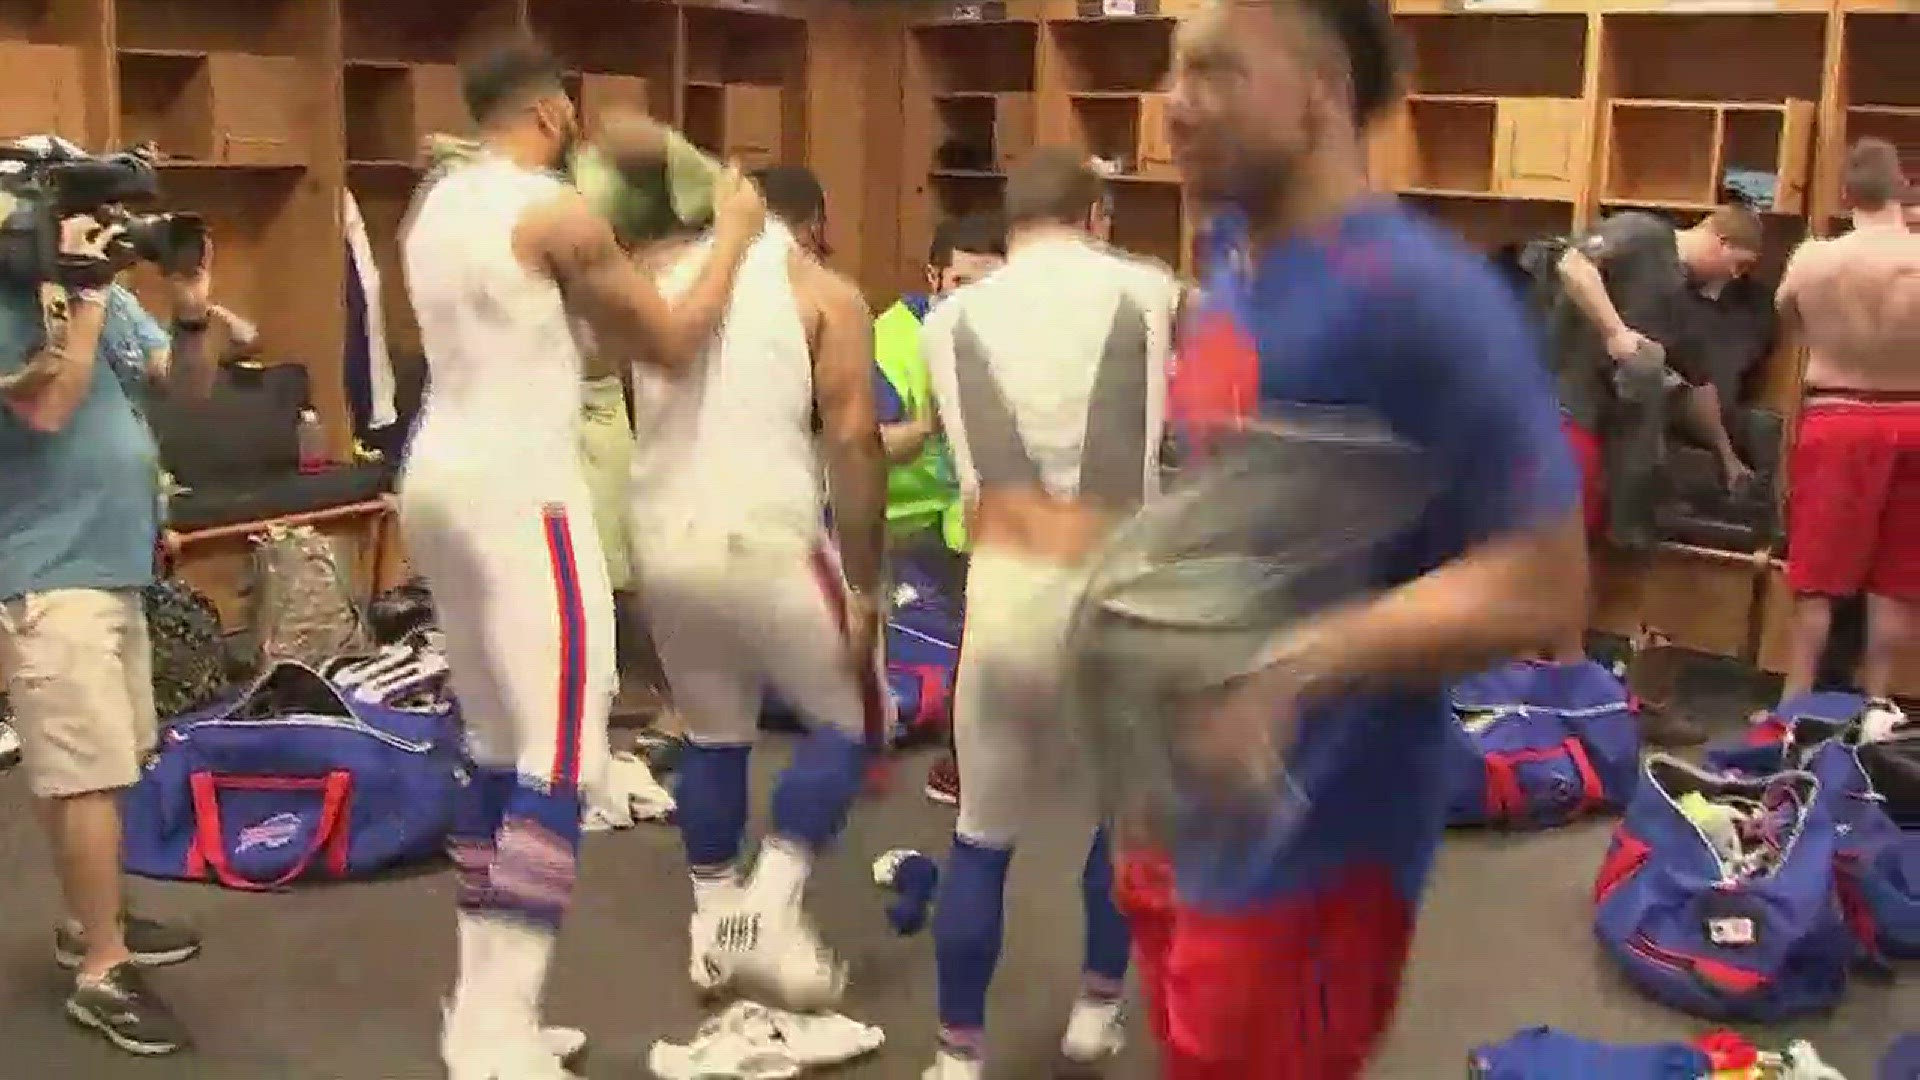 The Bills beat Miami, Cincinnati beat Baltimore and the Bills playoff drought is over. This is how they reacted.